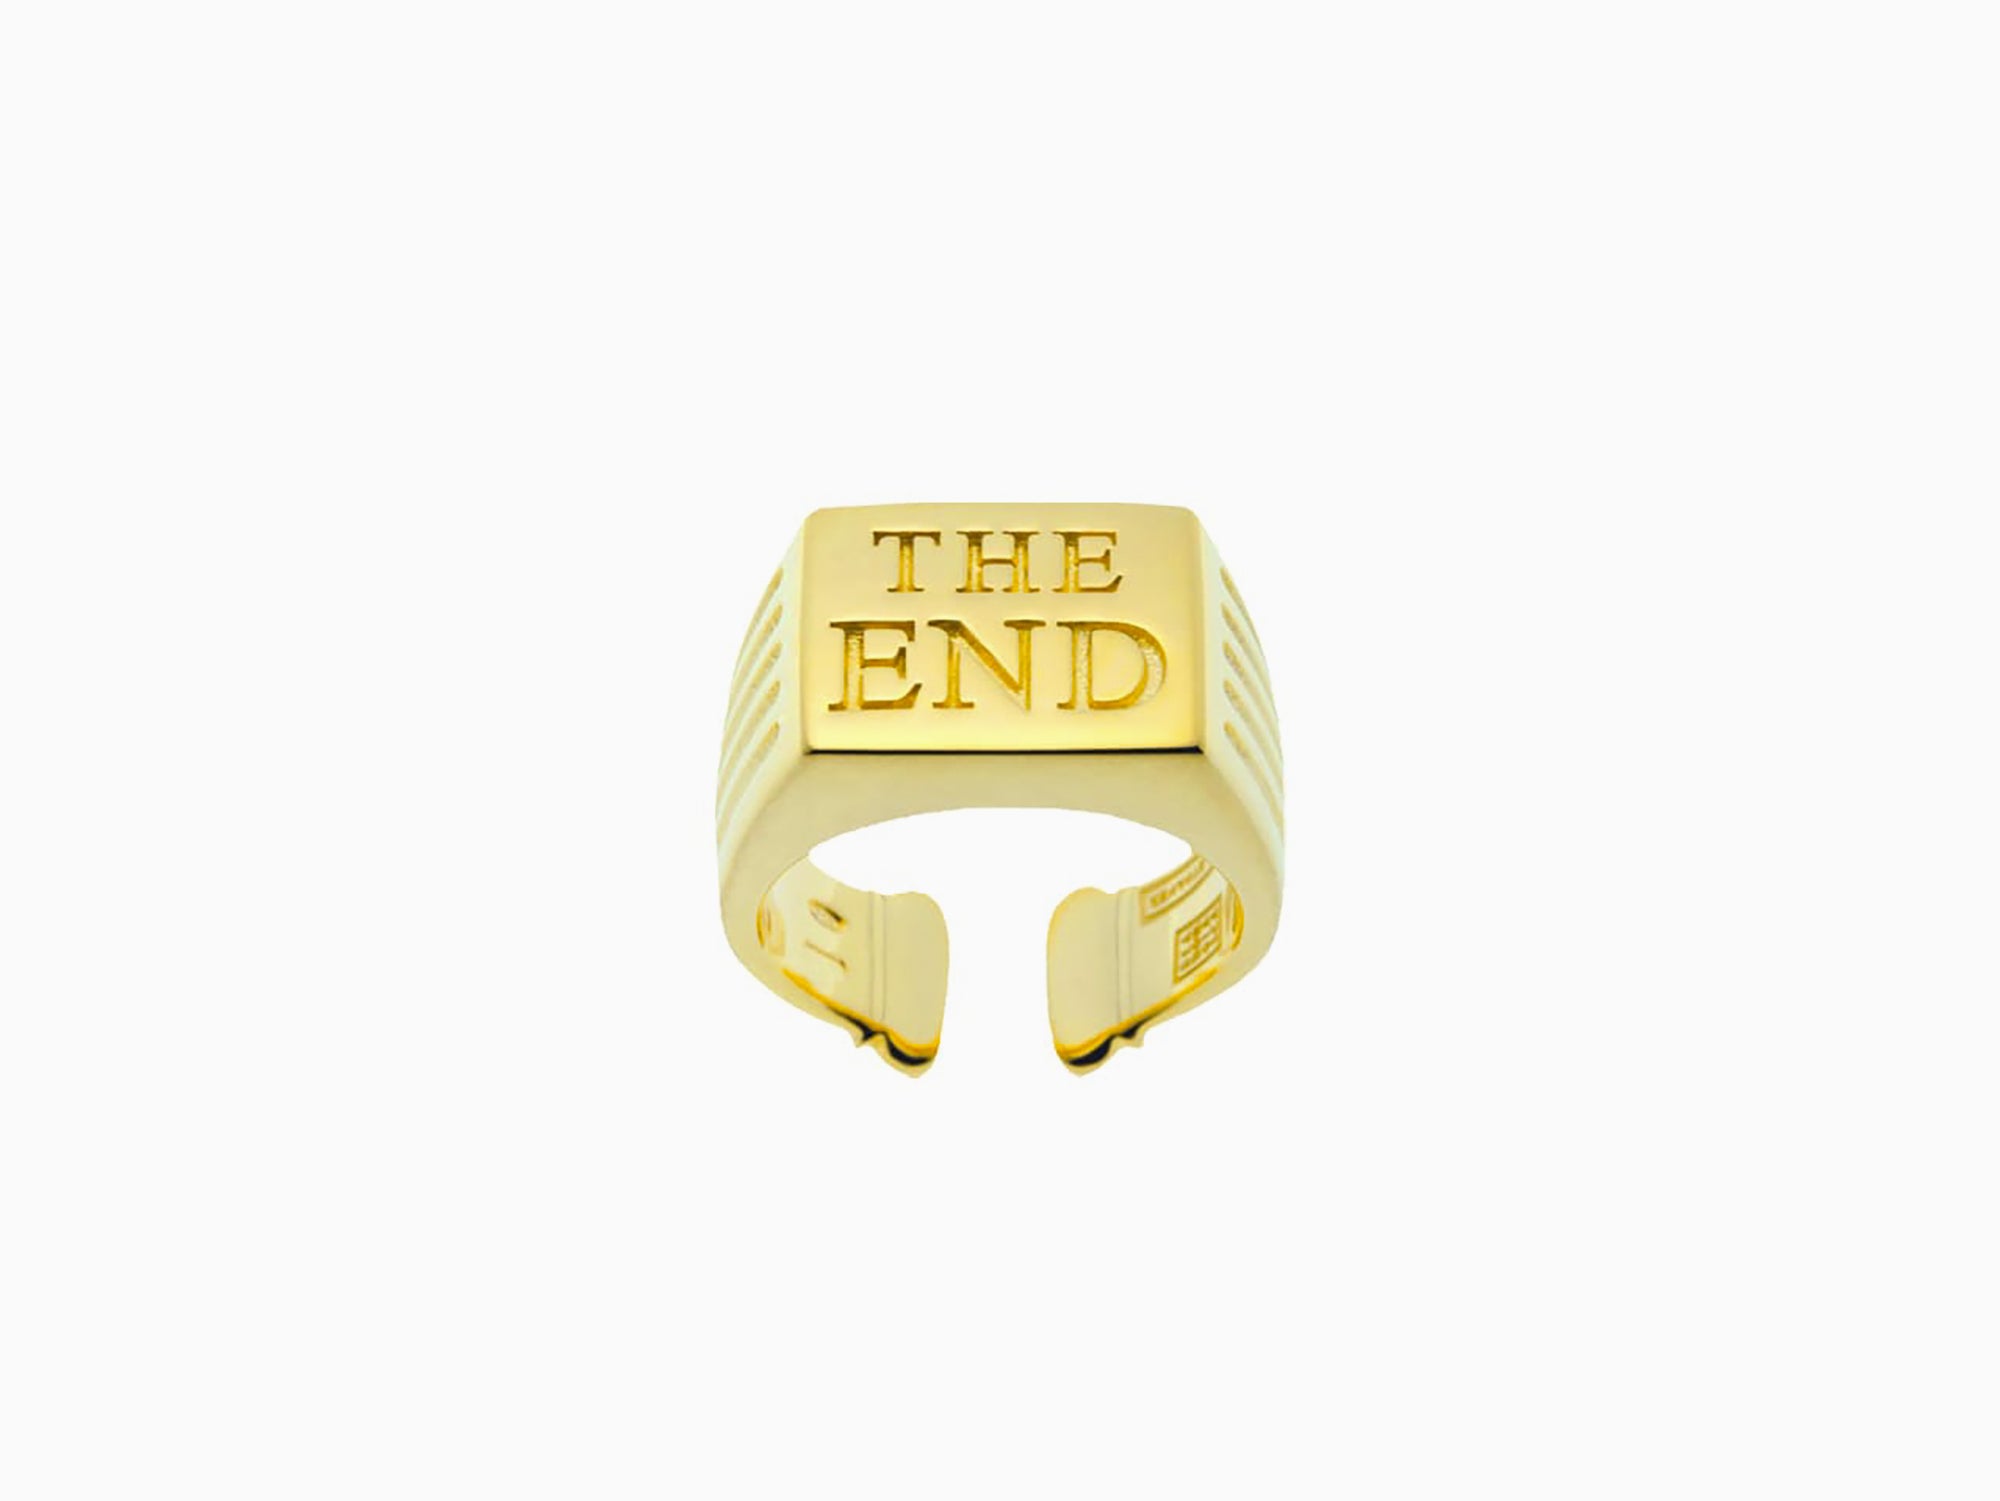 Toiletpaper - Bague "The End" - or